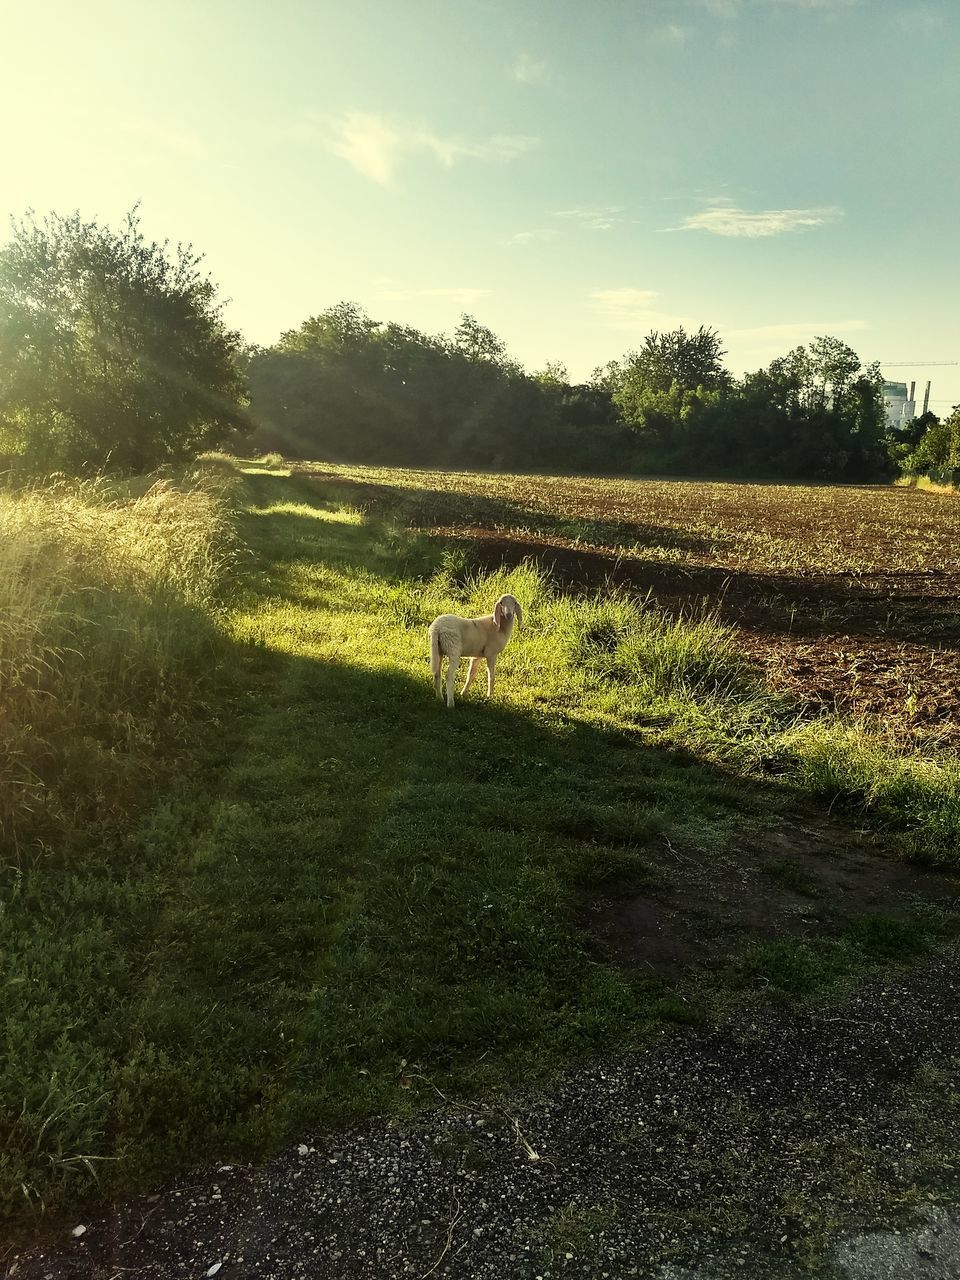 VIEW OF A DOG ON FIELD